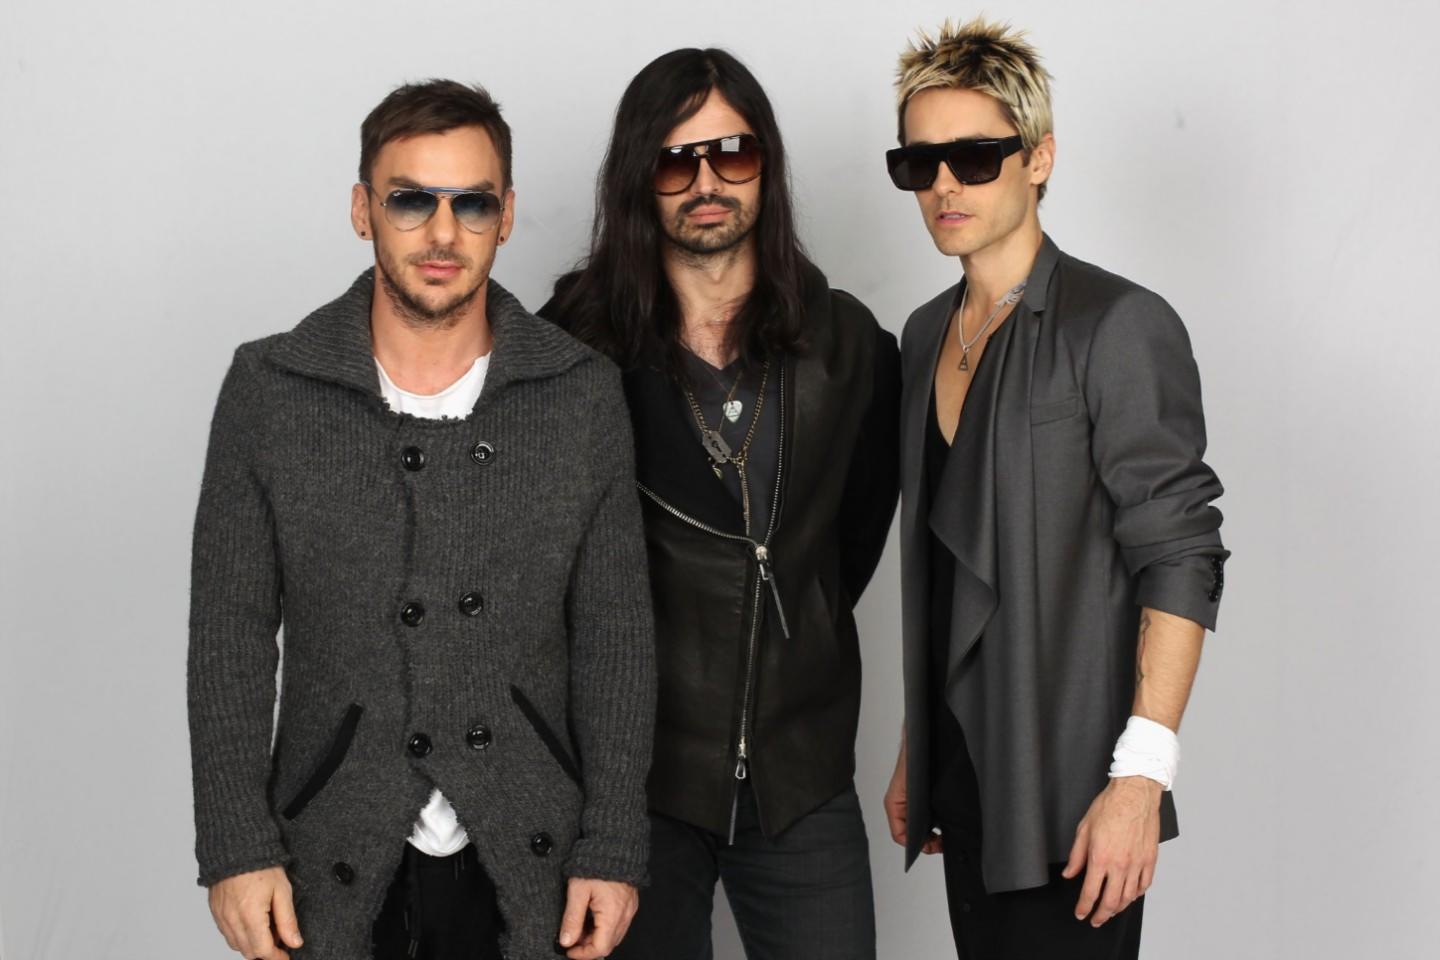 30 Seconds to Mars Tickets 30 Seconds to Mars Tour Dates 2023 and